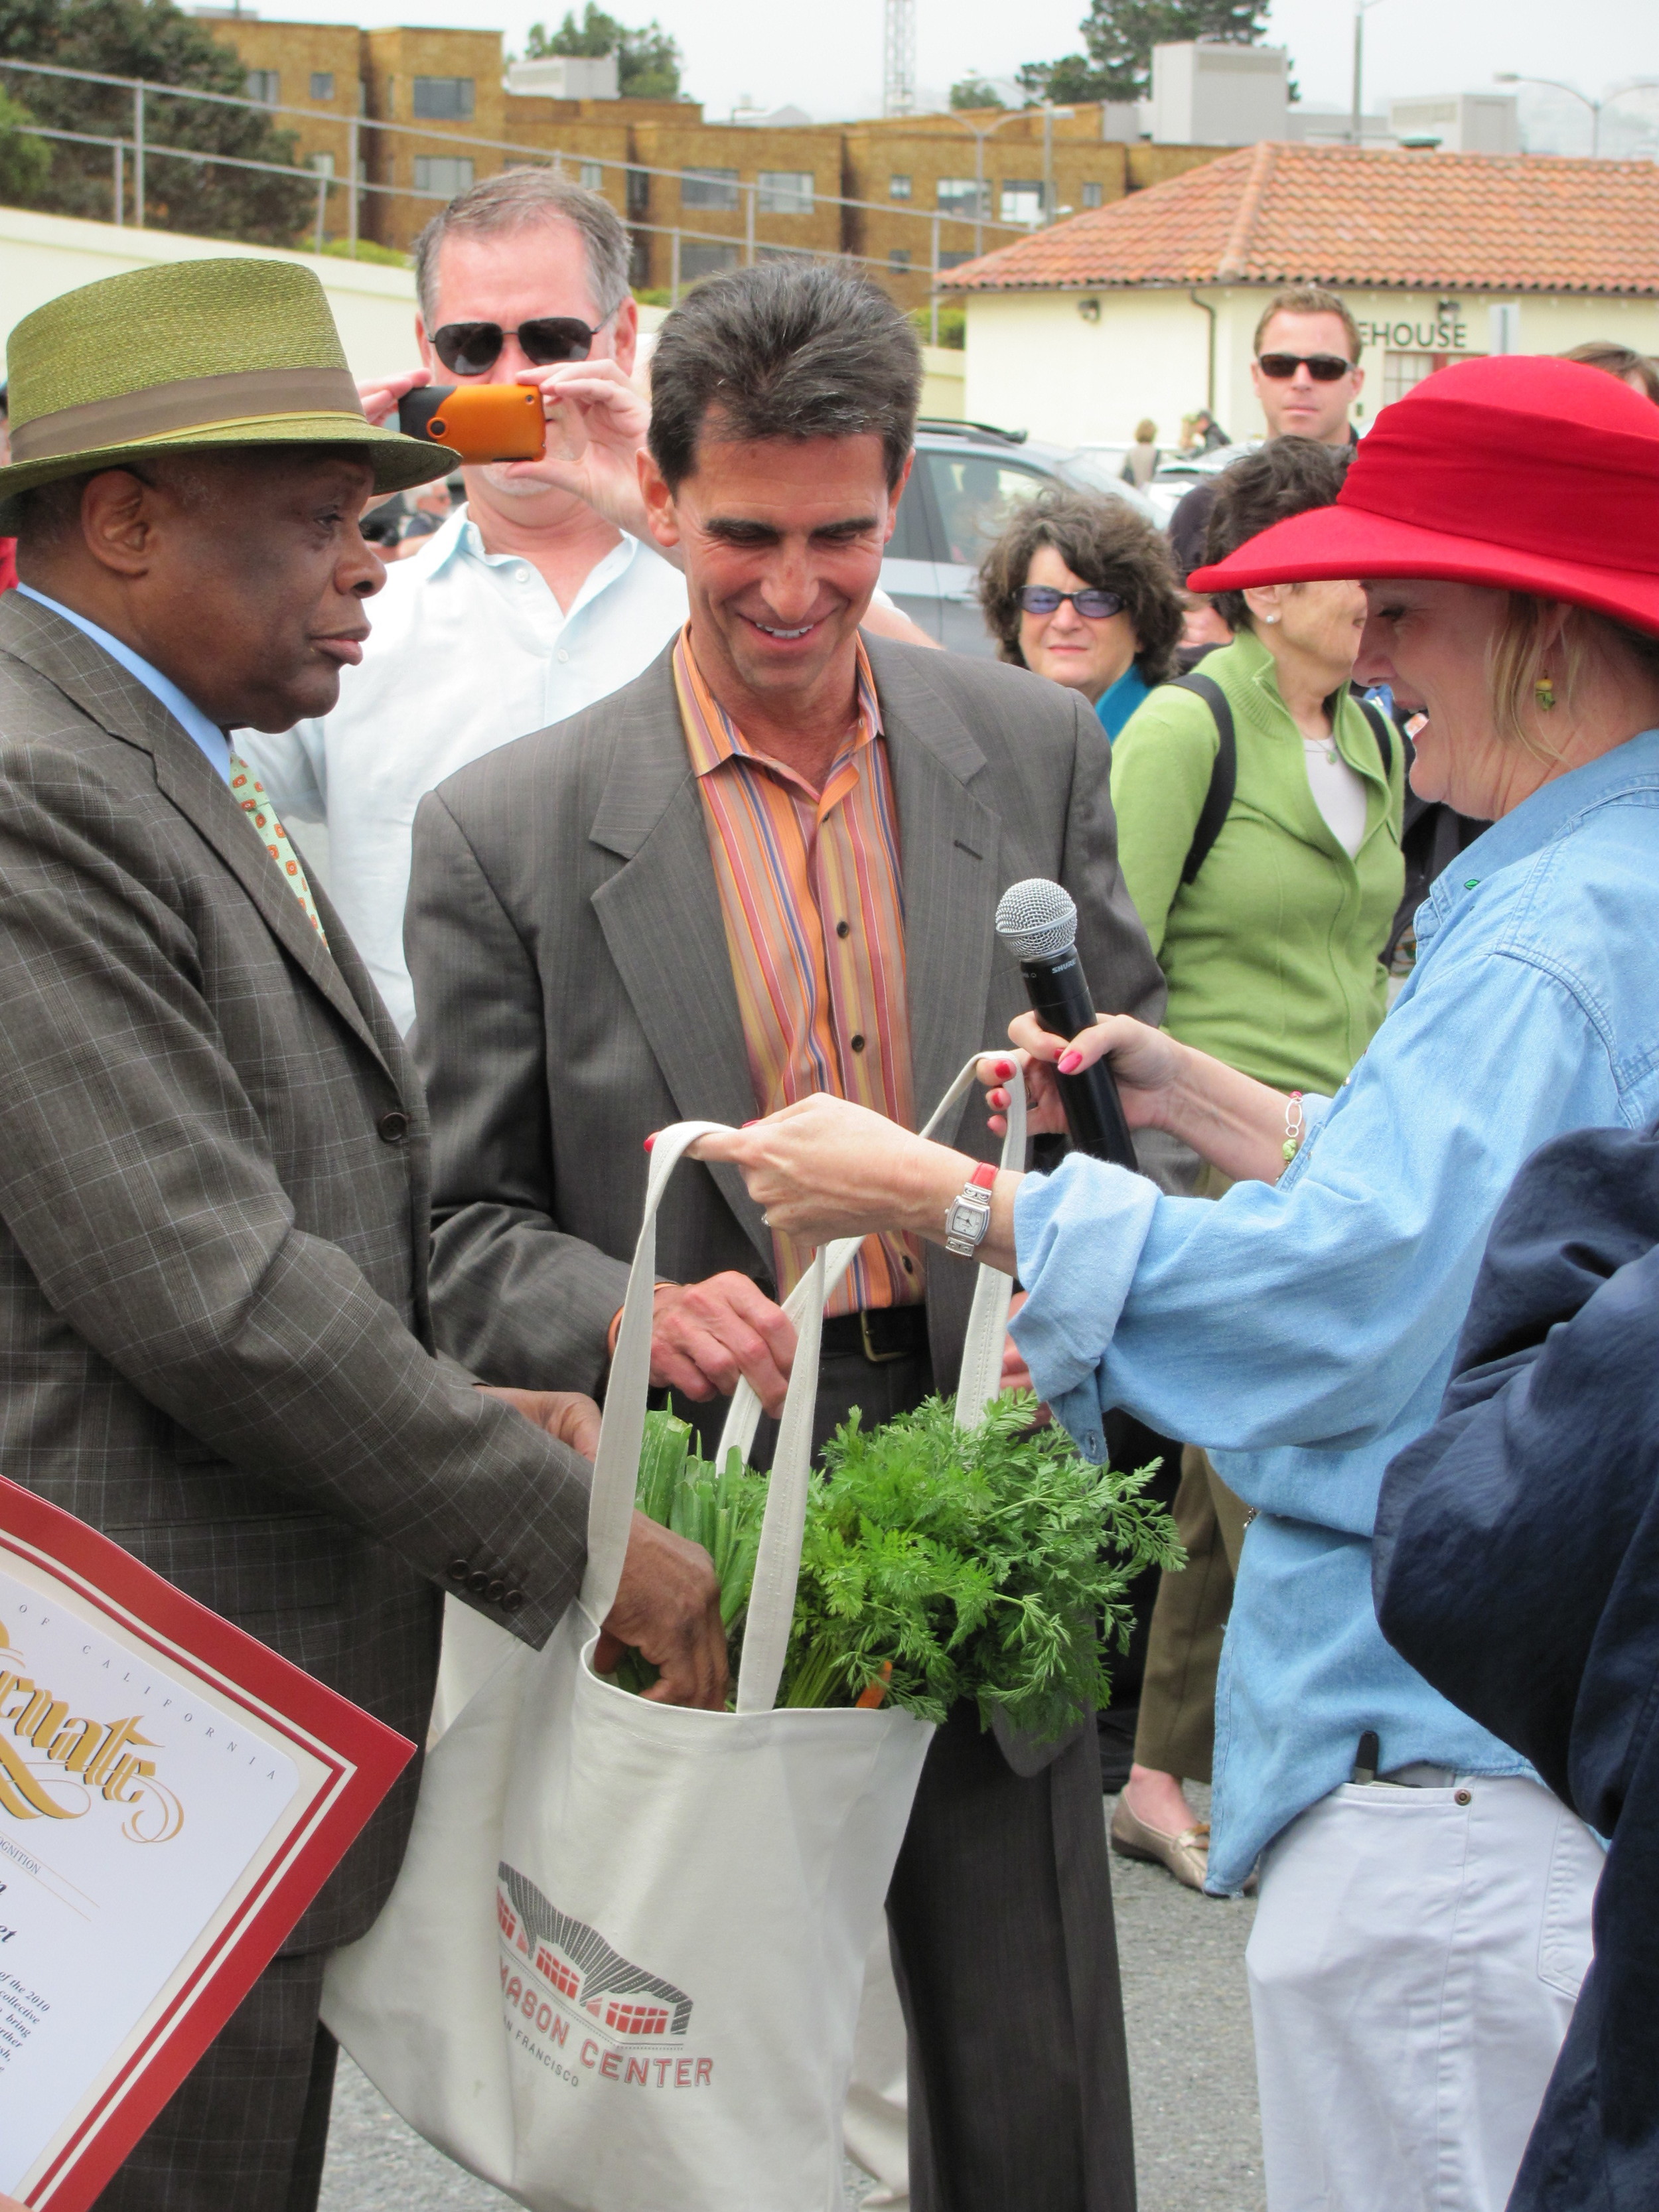 Fort Mason Center Farmers' Market had a Star Studded Opening